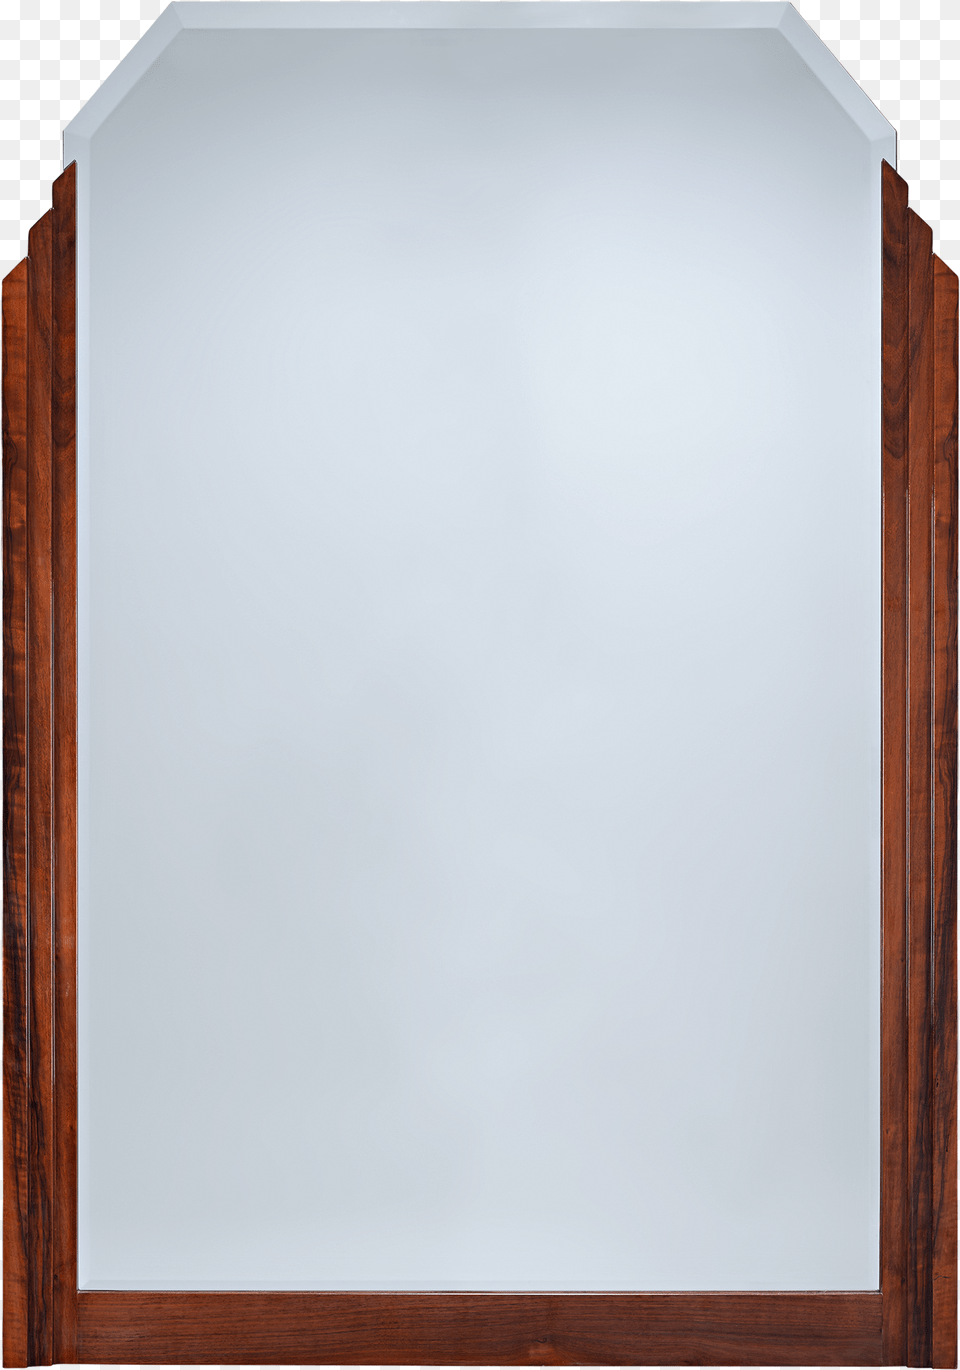 Art Deco Ship39s Bar Mirror Plywood, Photography, White Board Png